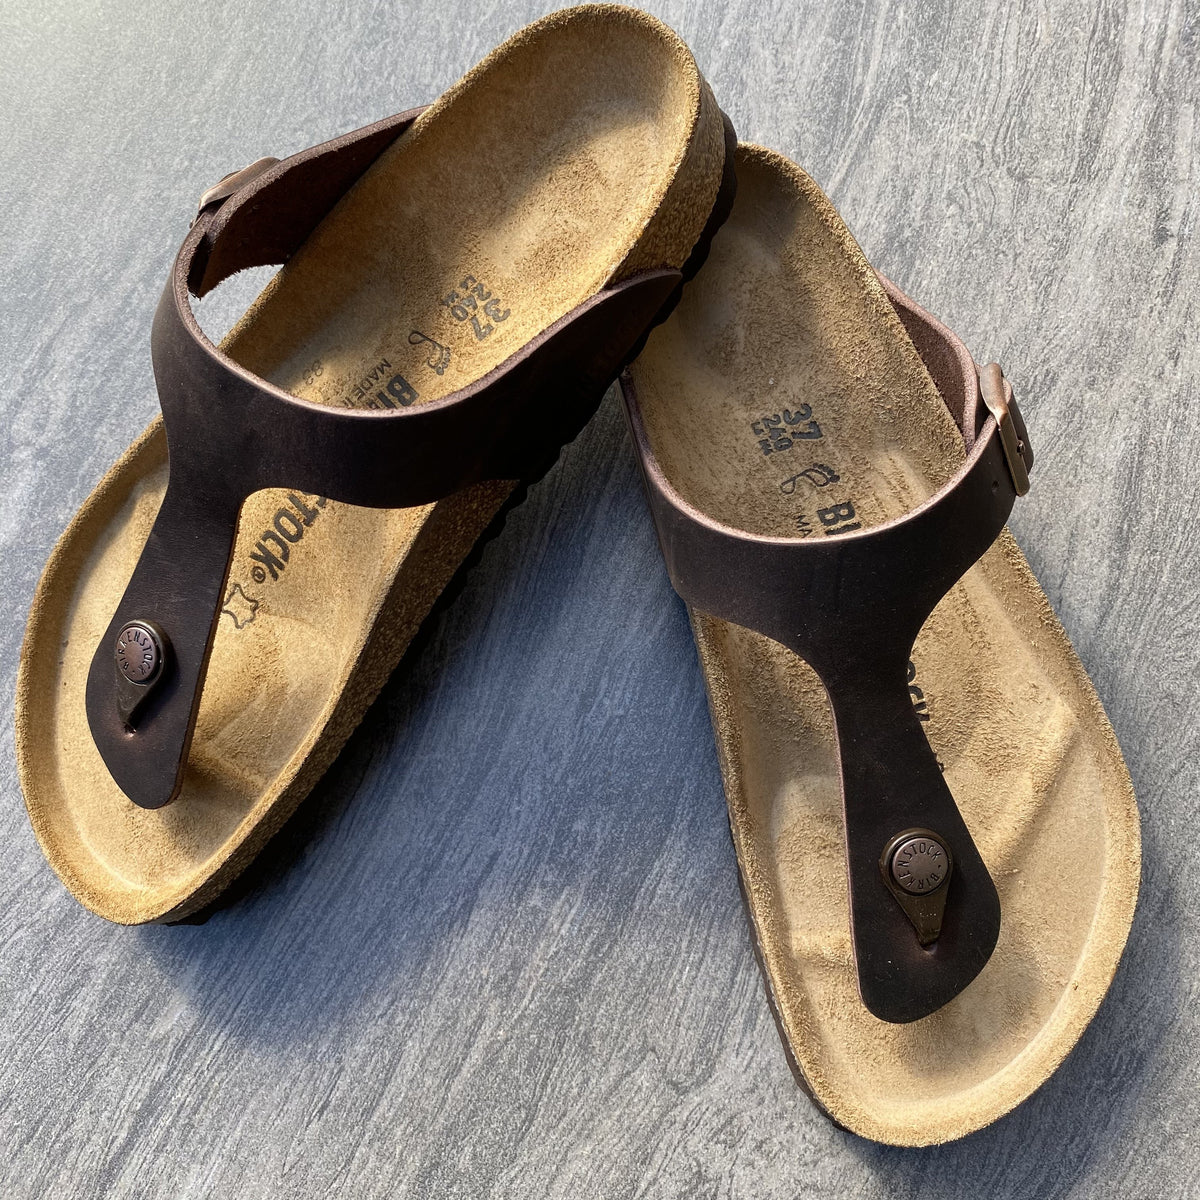 Gizeh Leather Thong Sandal available in West Cork – Craft Shop Bantry